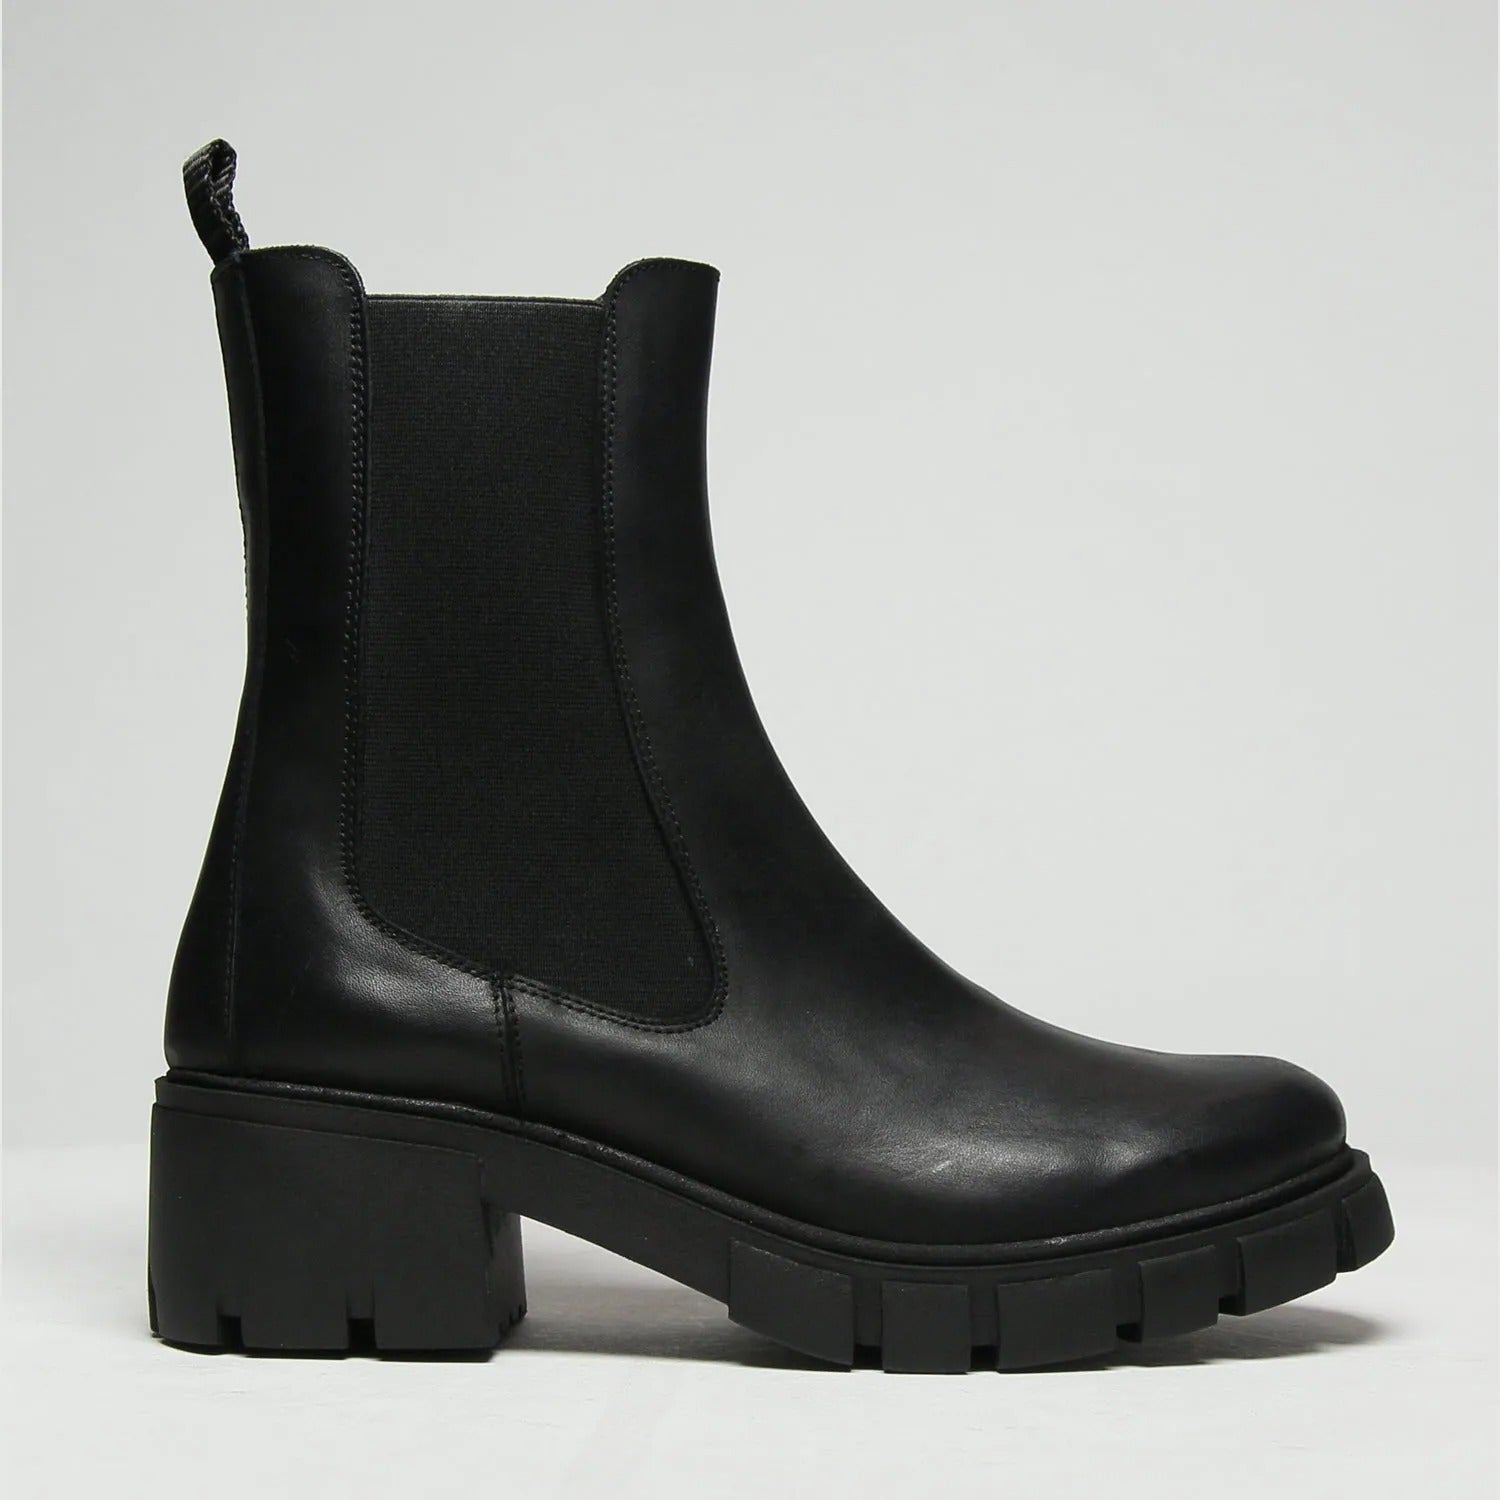 Schuh + Black Alba Cleated Leather Chelsea Boots